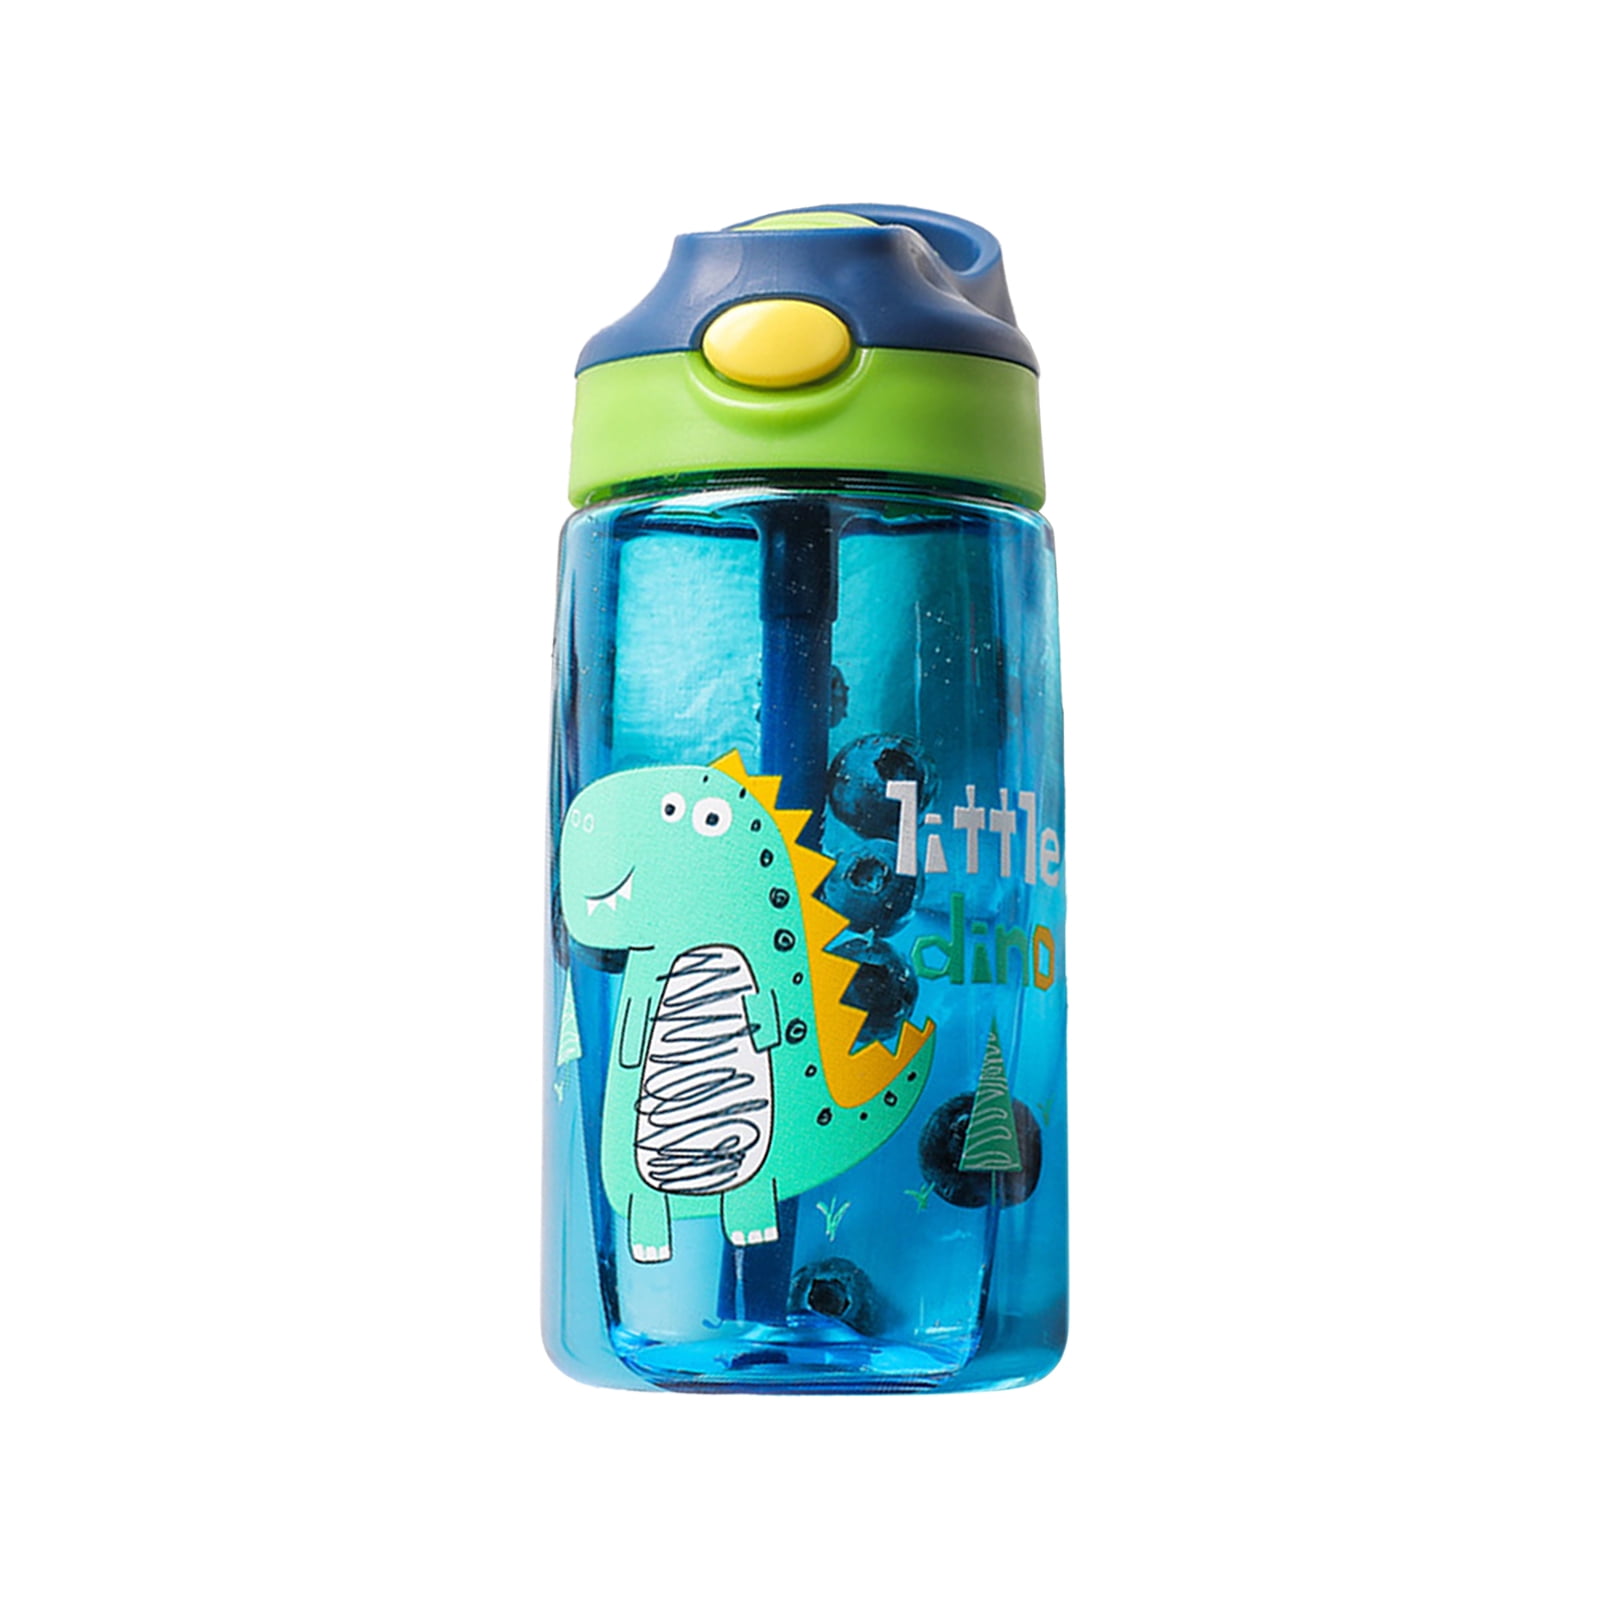 1pc kids Stainless Steel Double Wall Water Bottles, Vacuum Insulated Bottle  With Straw Lid, Insulated Water Bottle Keeps Water Cold for school,Leak-Proof  and Scald-Proof with Cute Designf for Girls & Boys